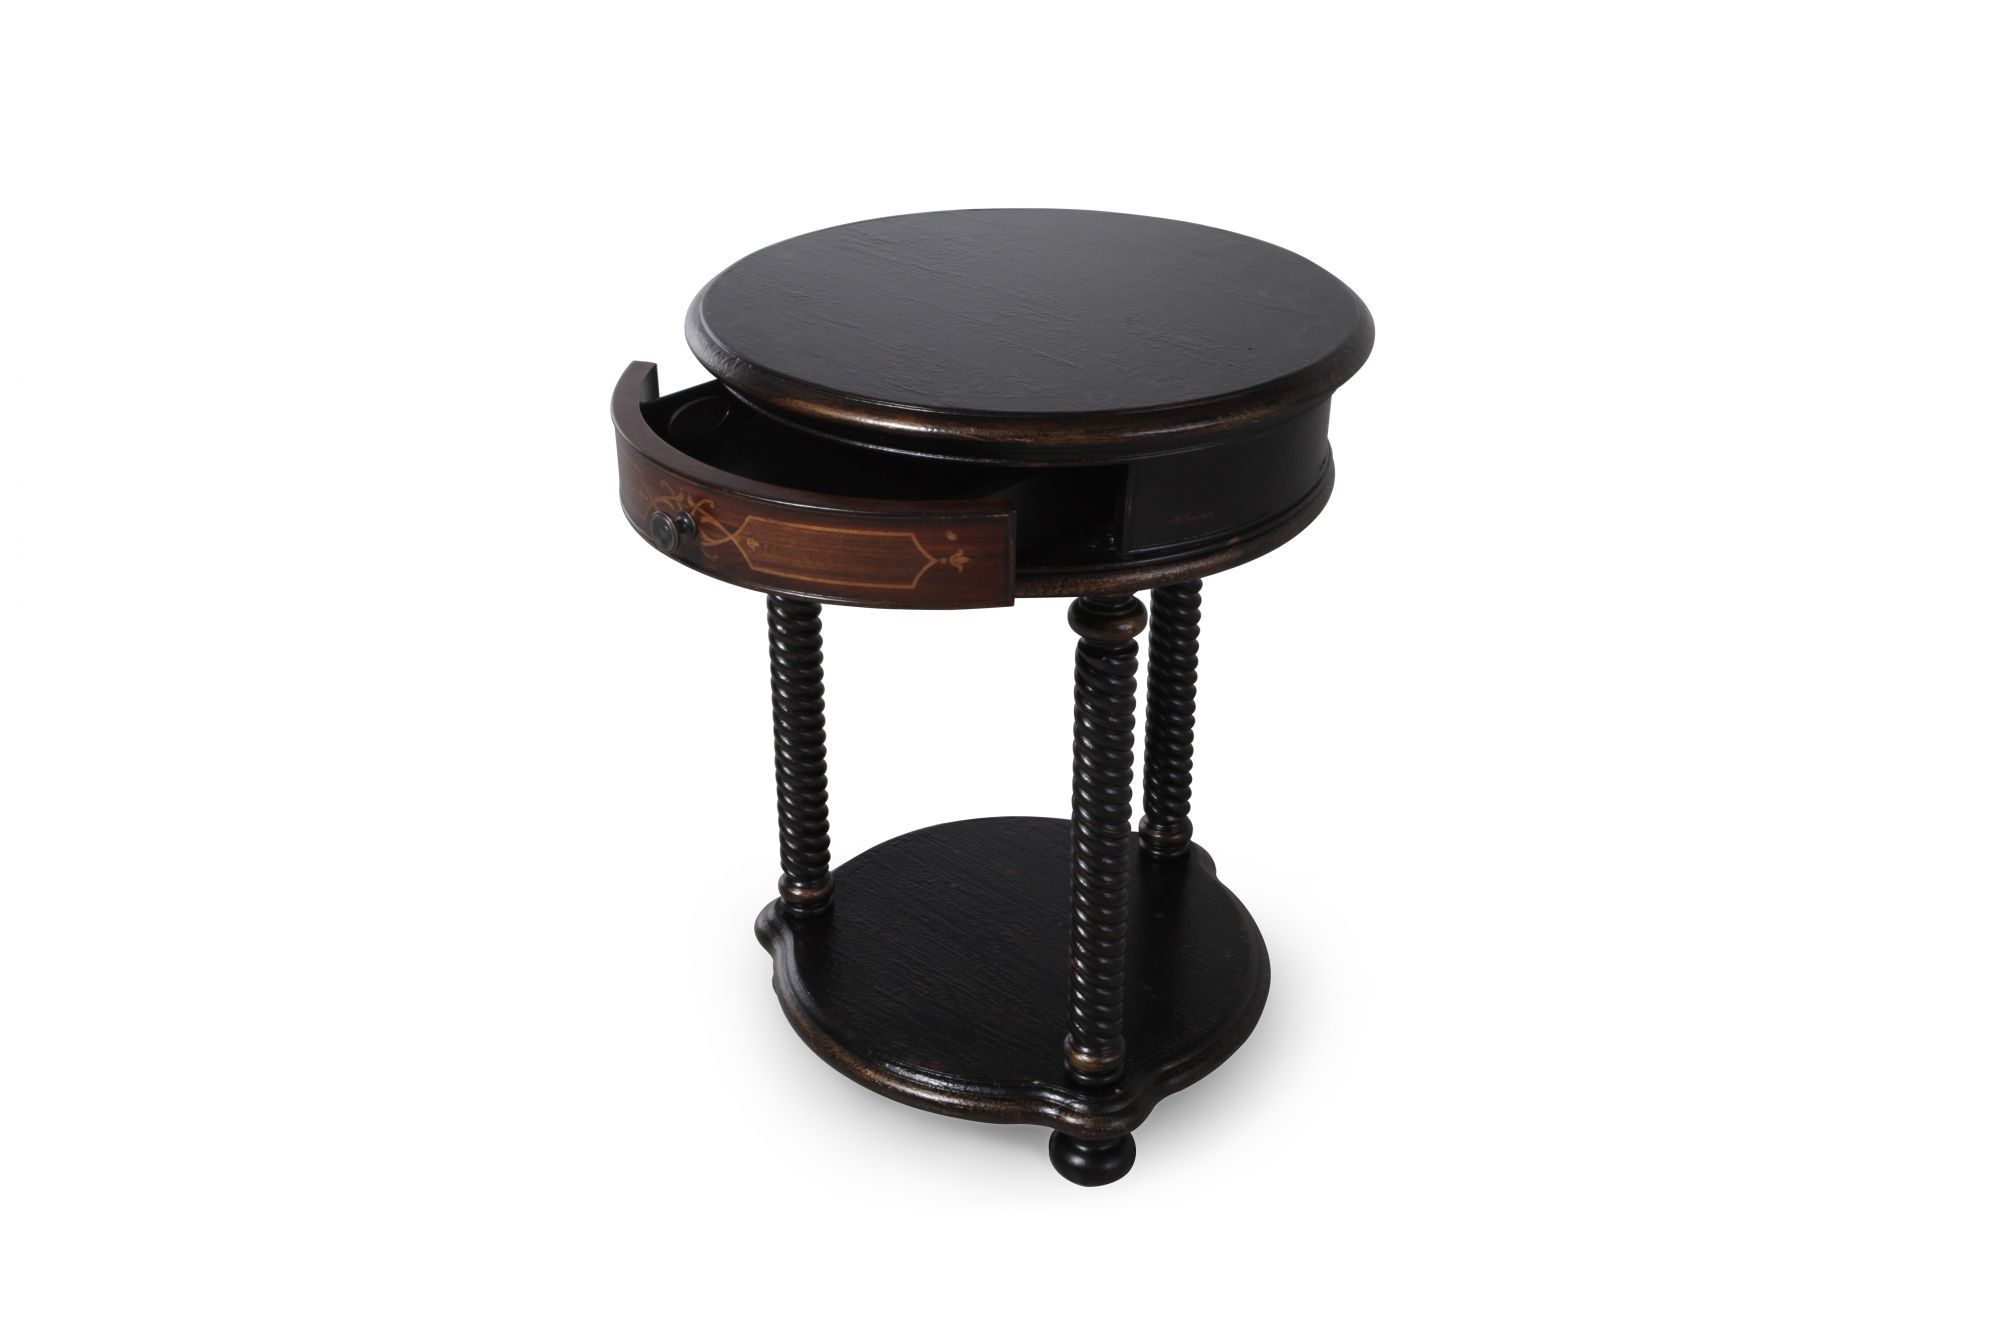 twisted legs traditional round accent table black mathis hook wooden outdoor chairs white marble top dining folding tray coffee wine bar furniture small leather armchair height